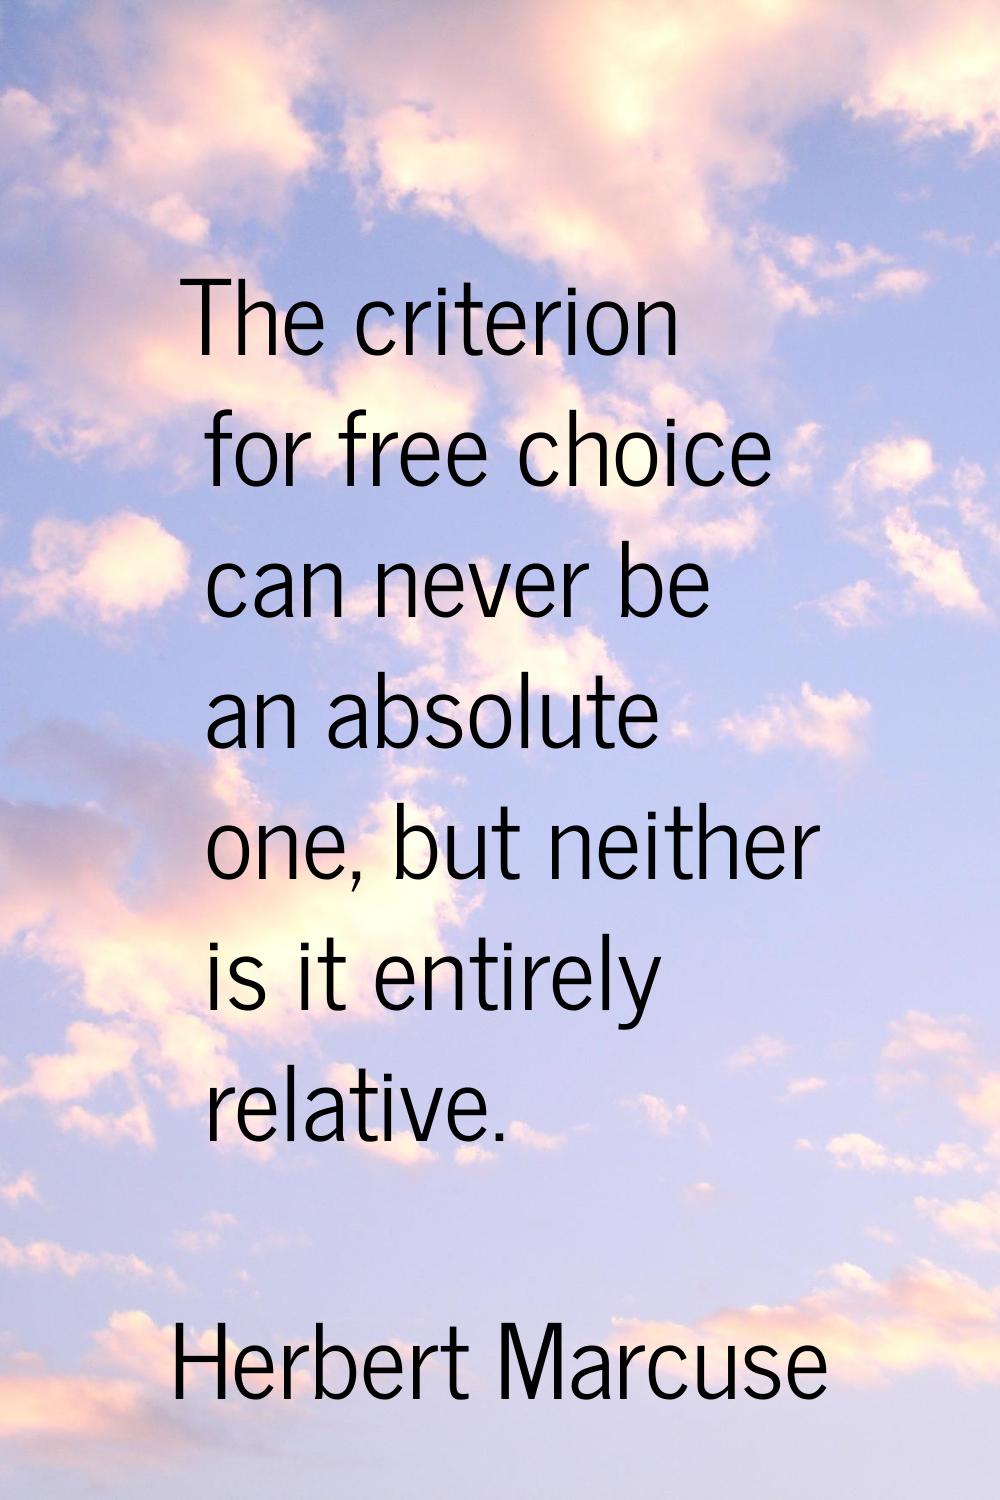 The criterion for free choice can never be an absolute one, but neither is it entirely relative.